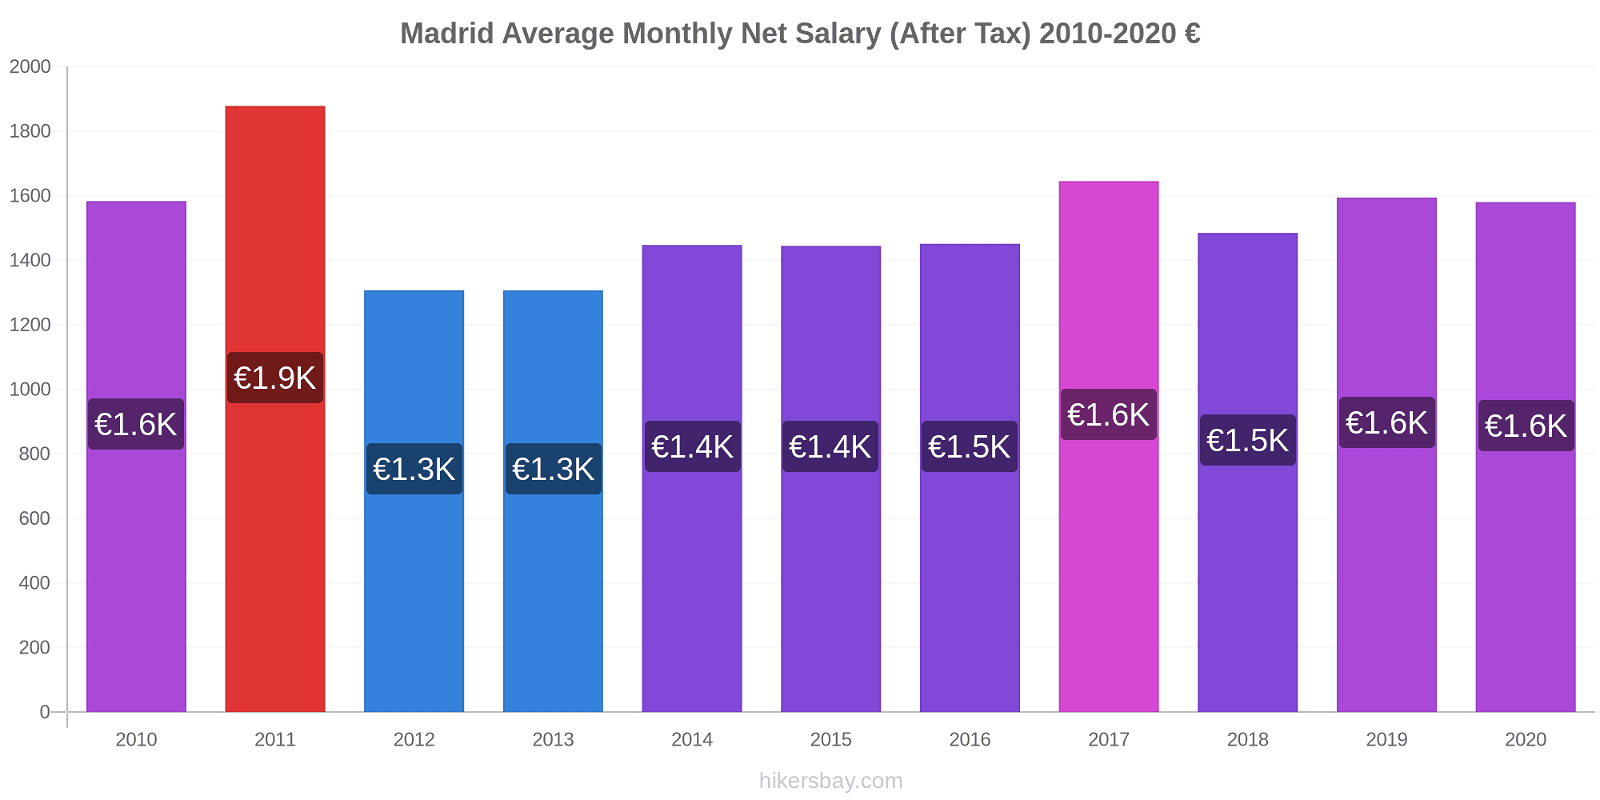 Madrid price changes Average Monthly Net Salary (After Tax) hikersbay.com